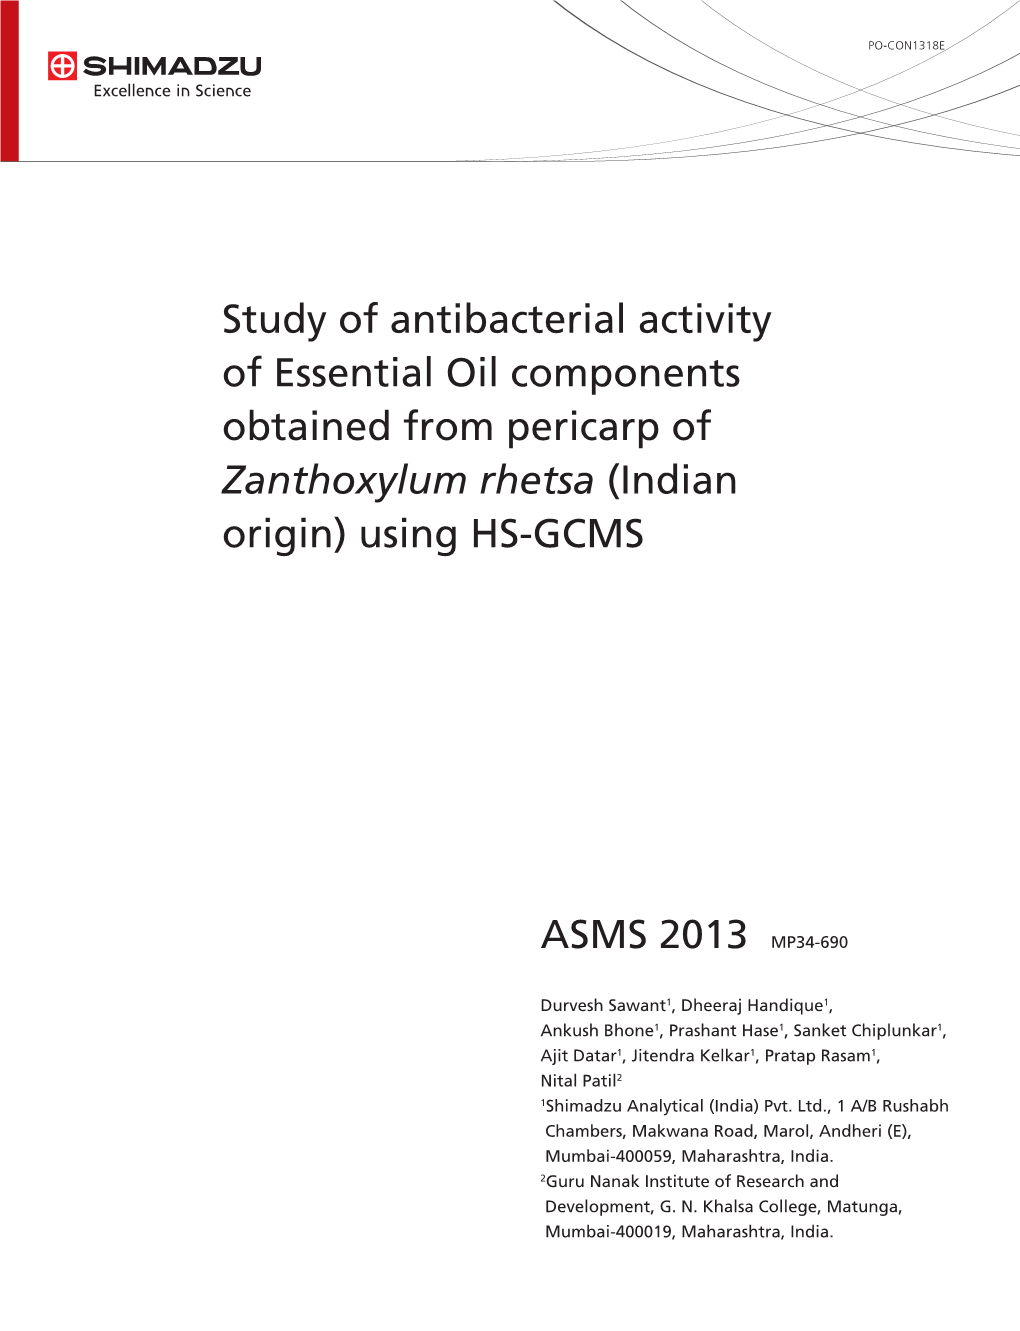 Study of Antibacterial Activity of Essential Oil Components Obtained from Pericarp of Zanthoxylum Rhetsa (Indian Origin) Using HS-GCMS